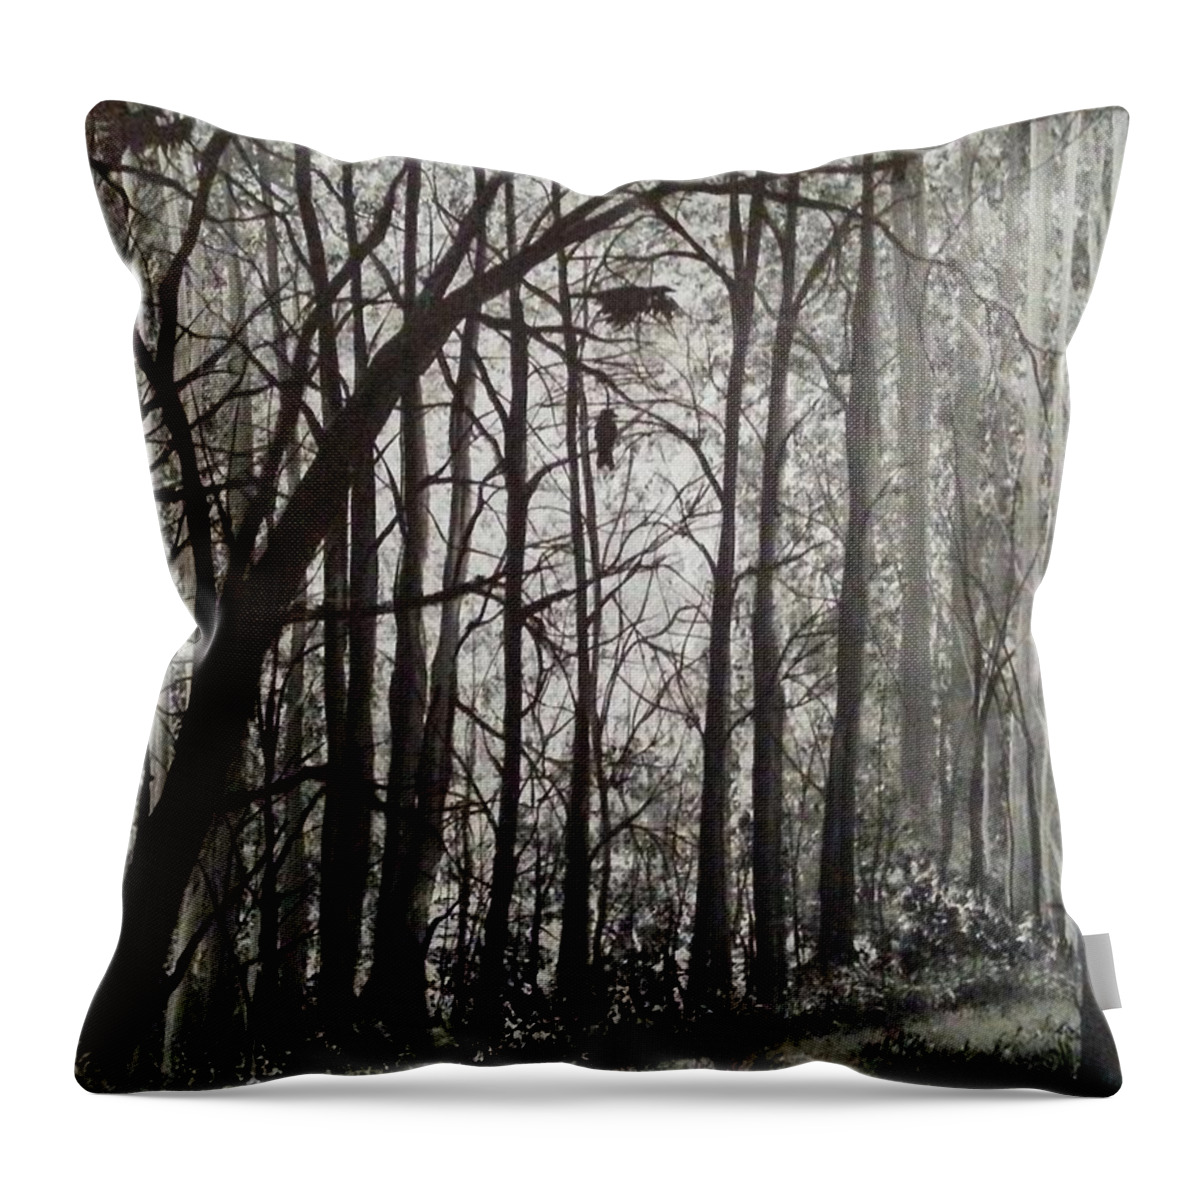 Crows Black White Trees Forest Throw Pillow featuring the painting Crows by Mindy Gibbs